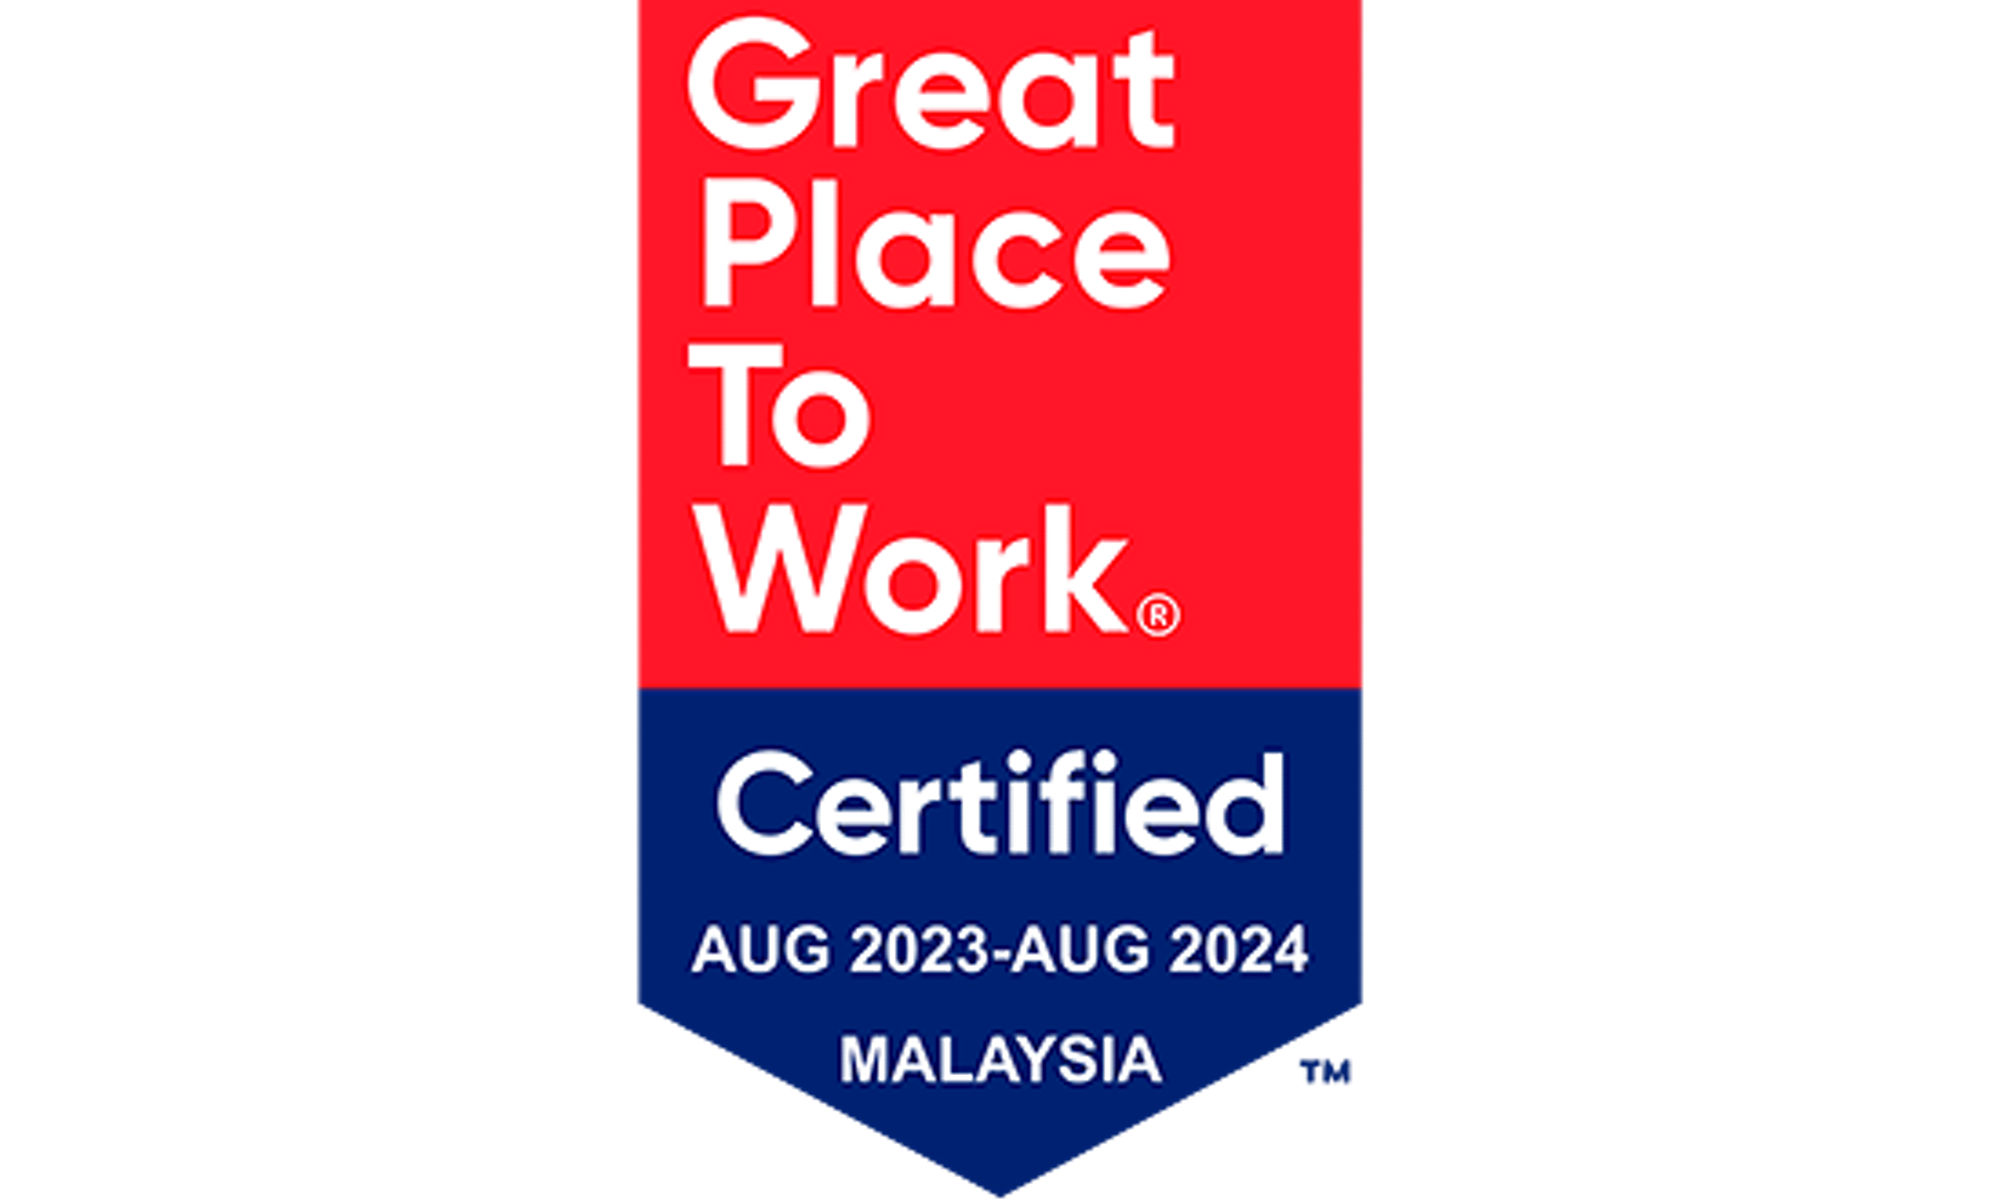 Great place to work Malaysia logo